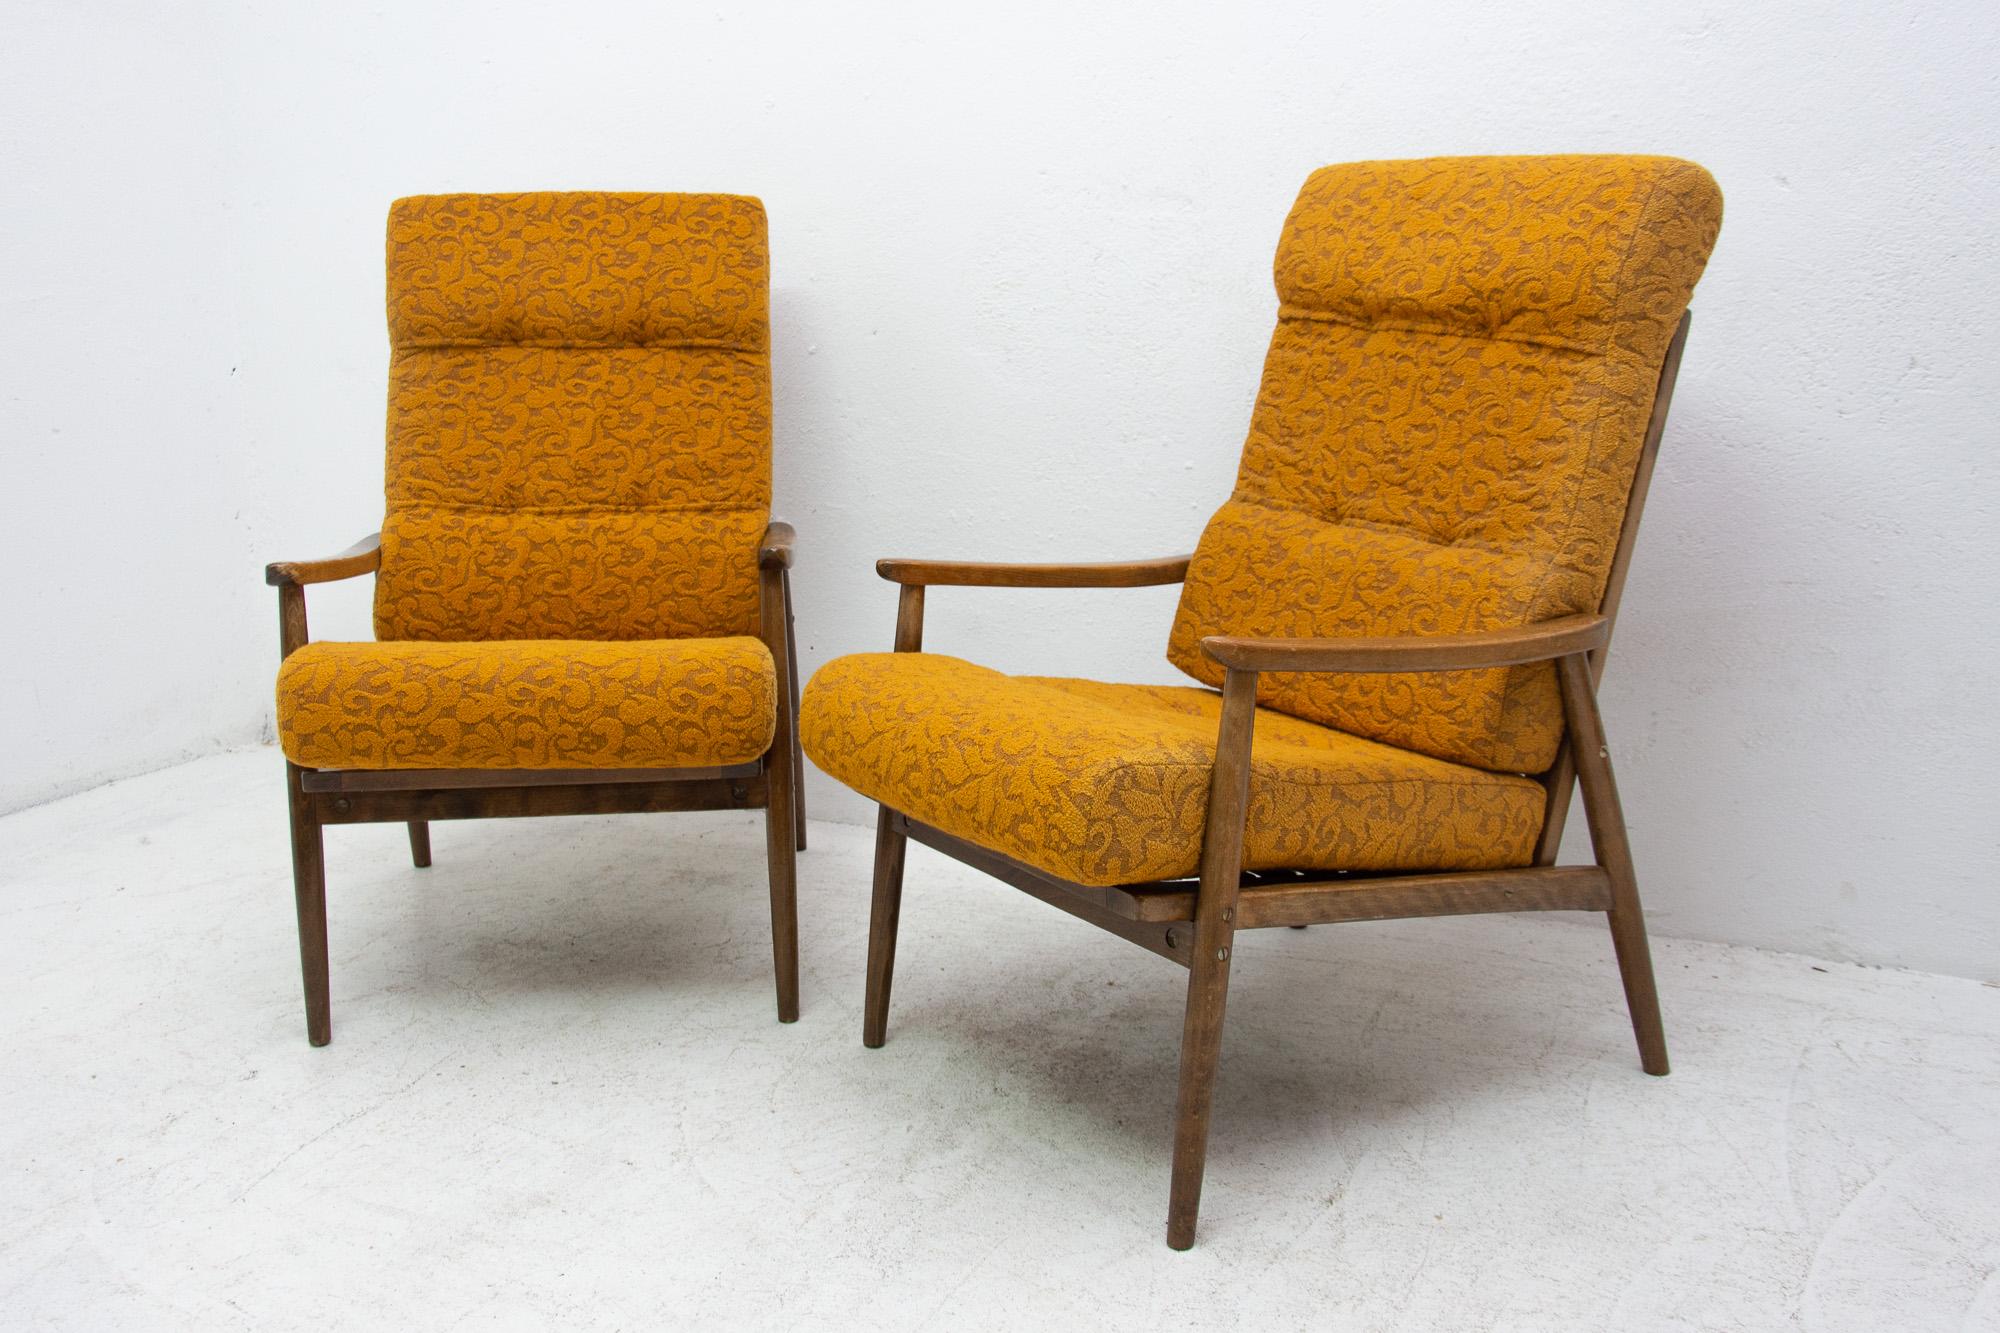 Pair of Midcentury Armchairs, Czechoslovakia, 1960s In Good Condition In Prague 8, CZ